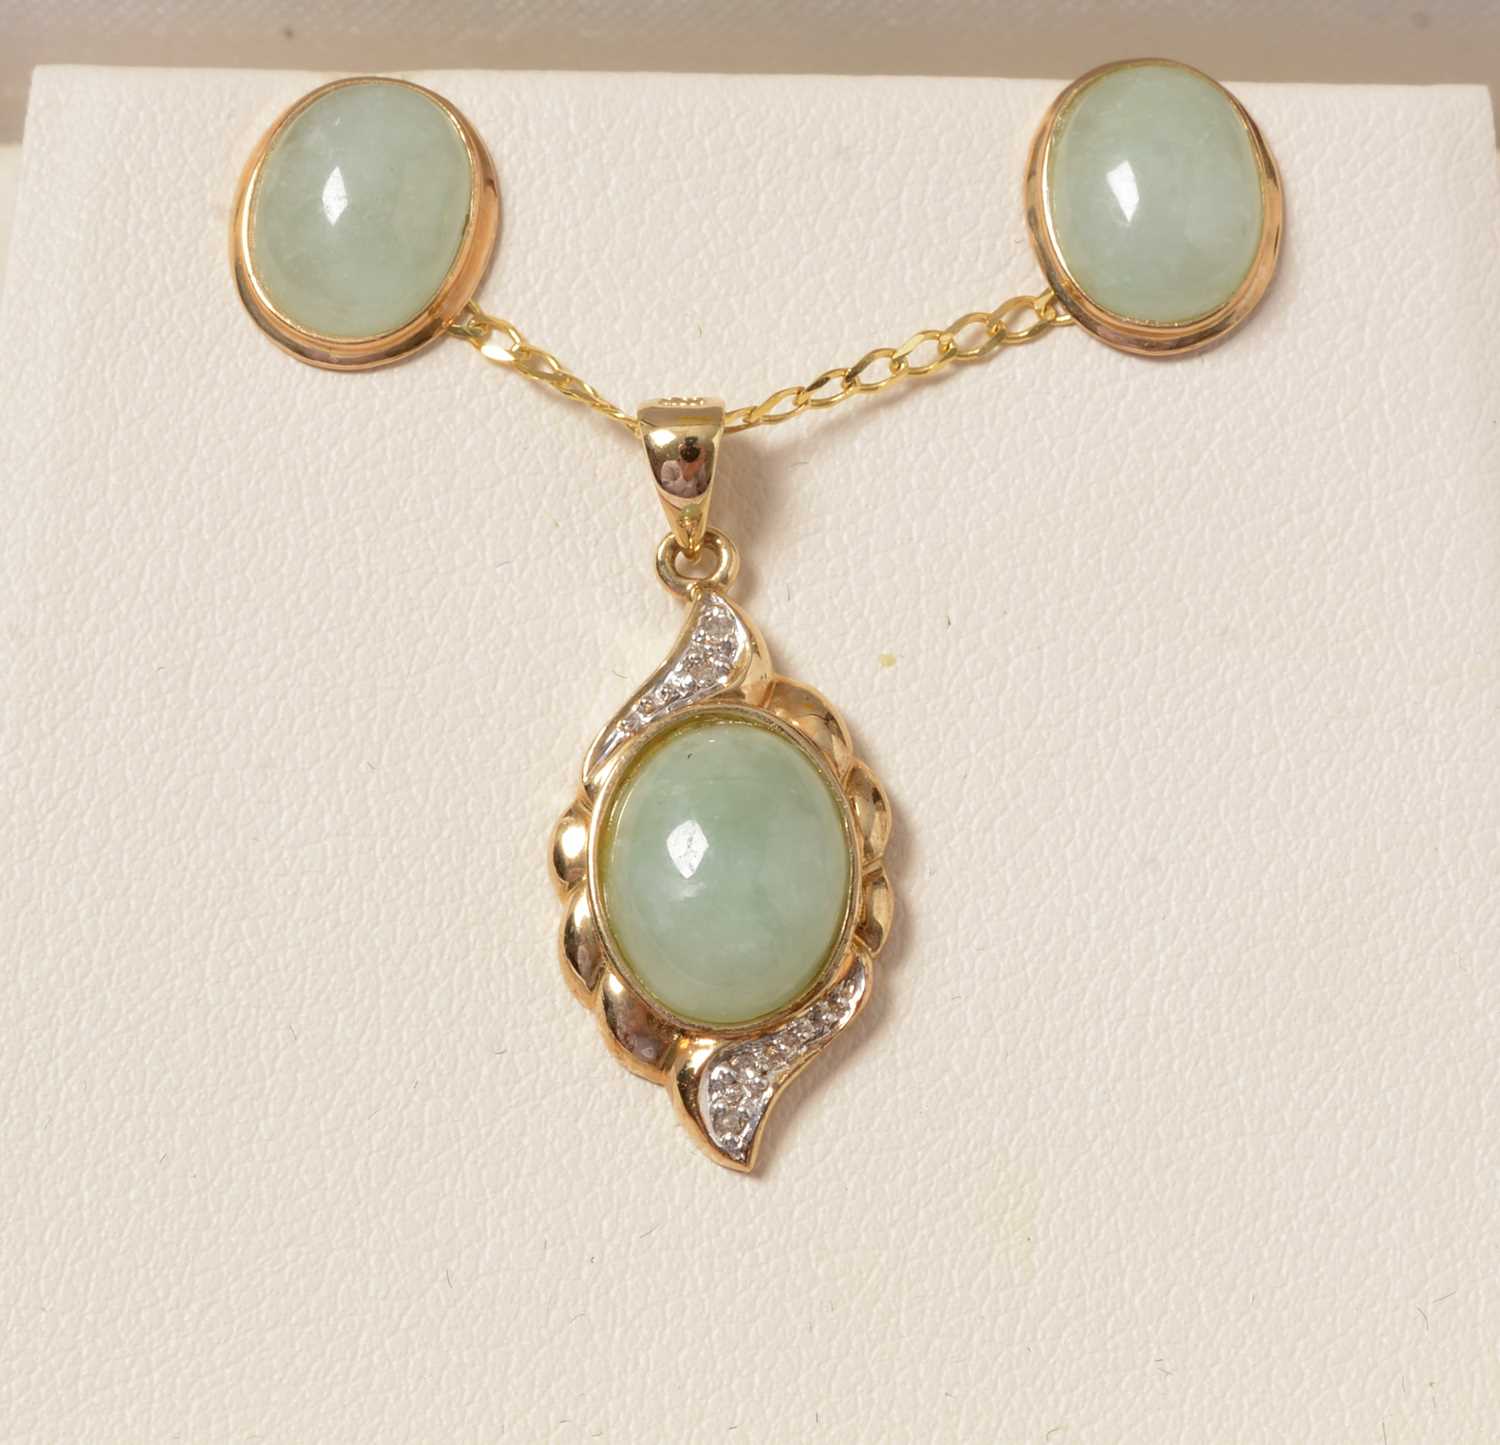 Lot 256 - A 9ct gold, diamond and jade coloured stone pendant necklace and earring set.